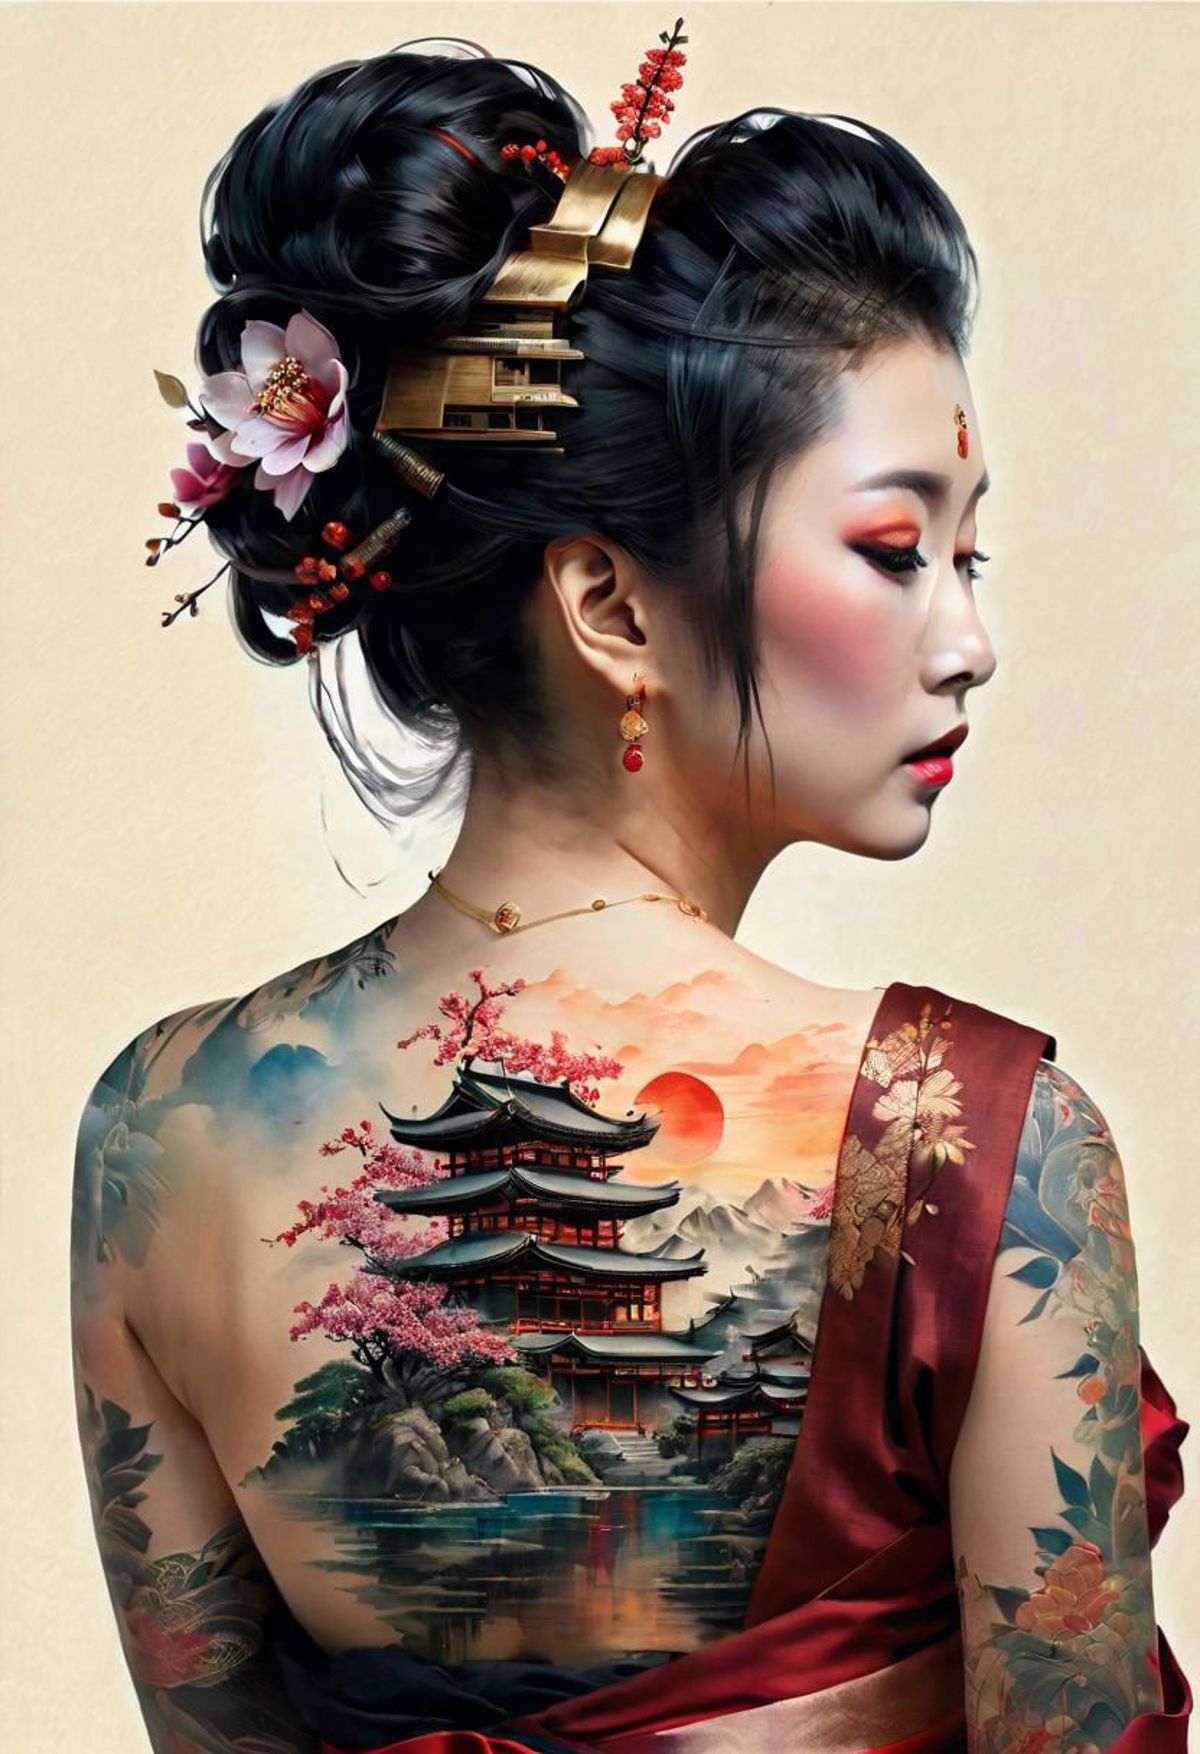 Tattooed woman with a flower in her hair and Japanese-inspired tattoo on her back.